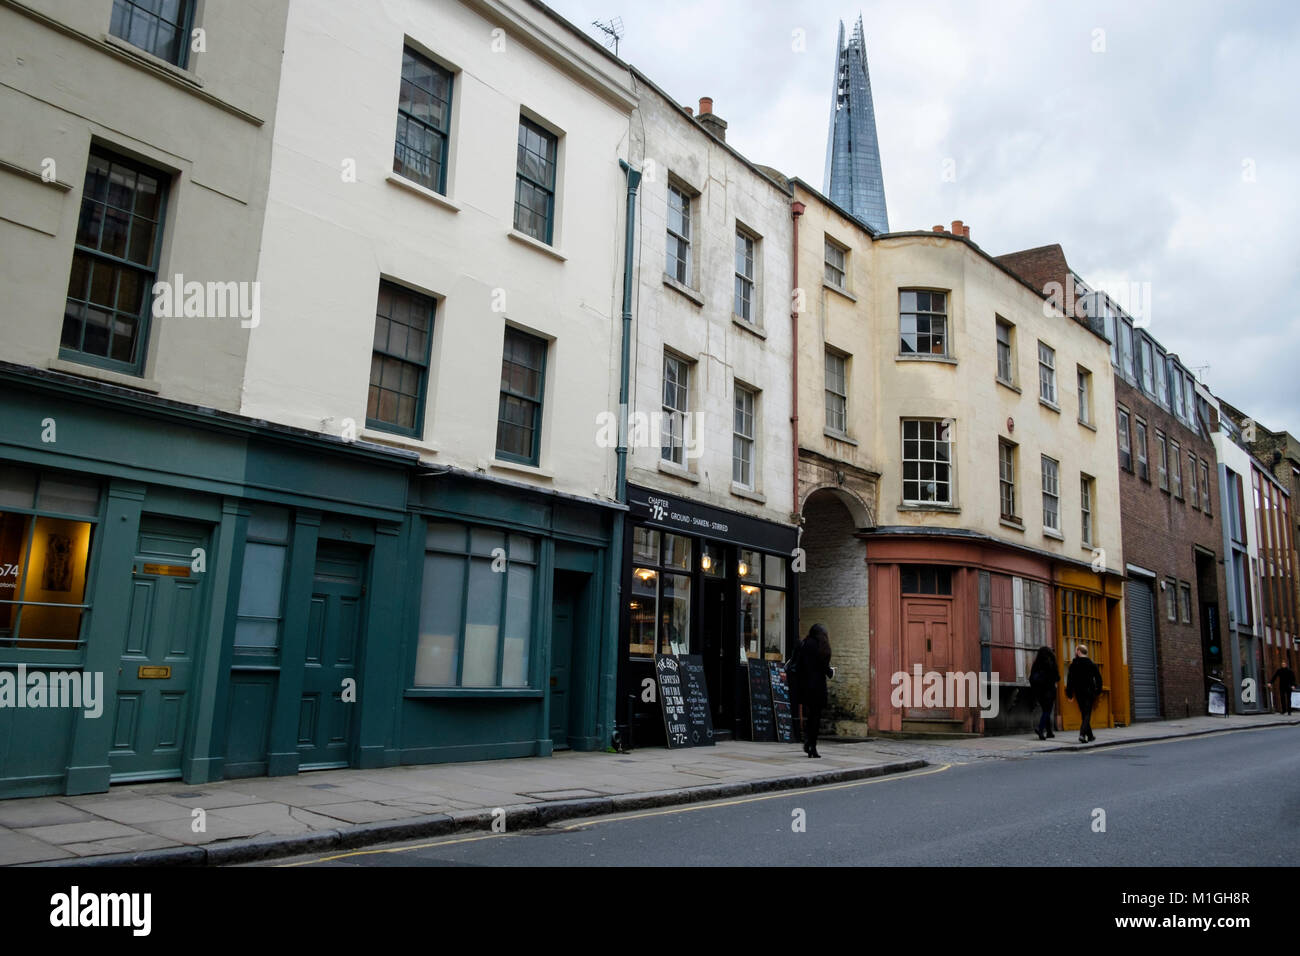 Bermondsey Street, London SE1: A row of Victorian shops and dwellings, a short distance from the 21st century architecture of the London Shard Stock Photo